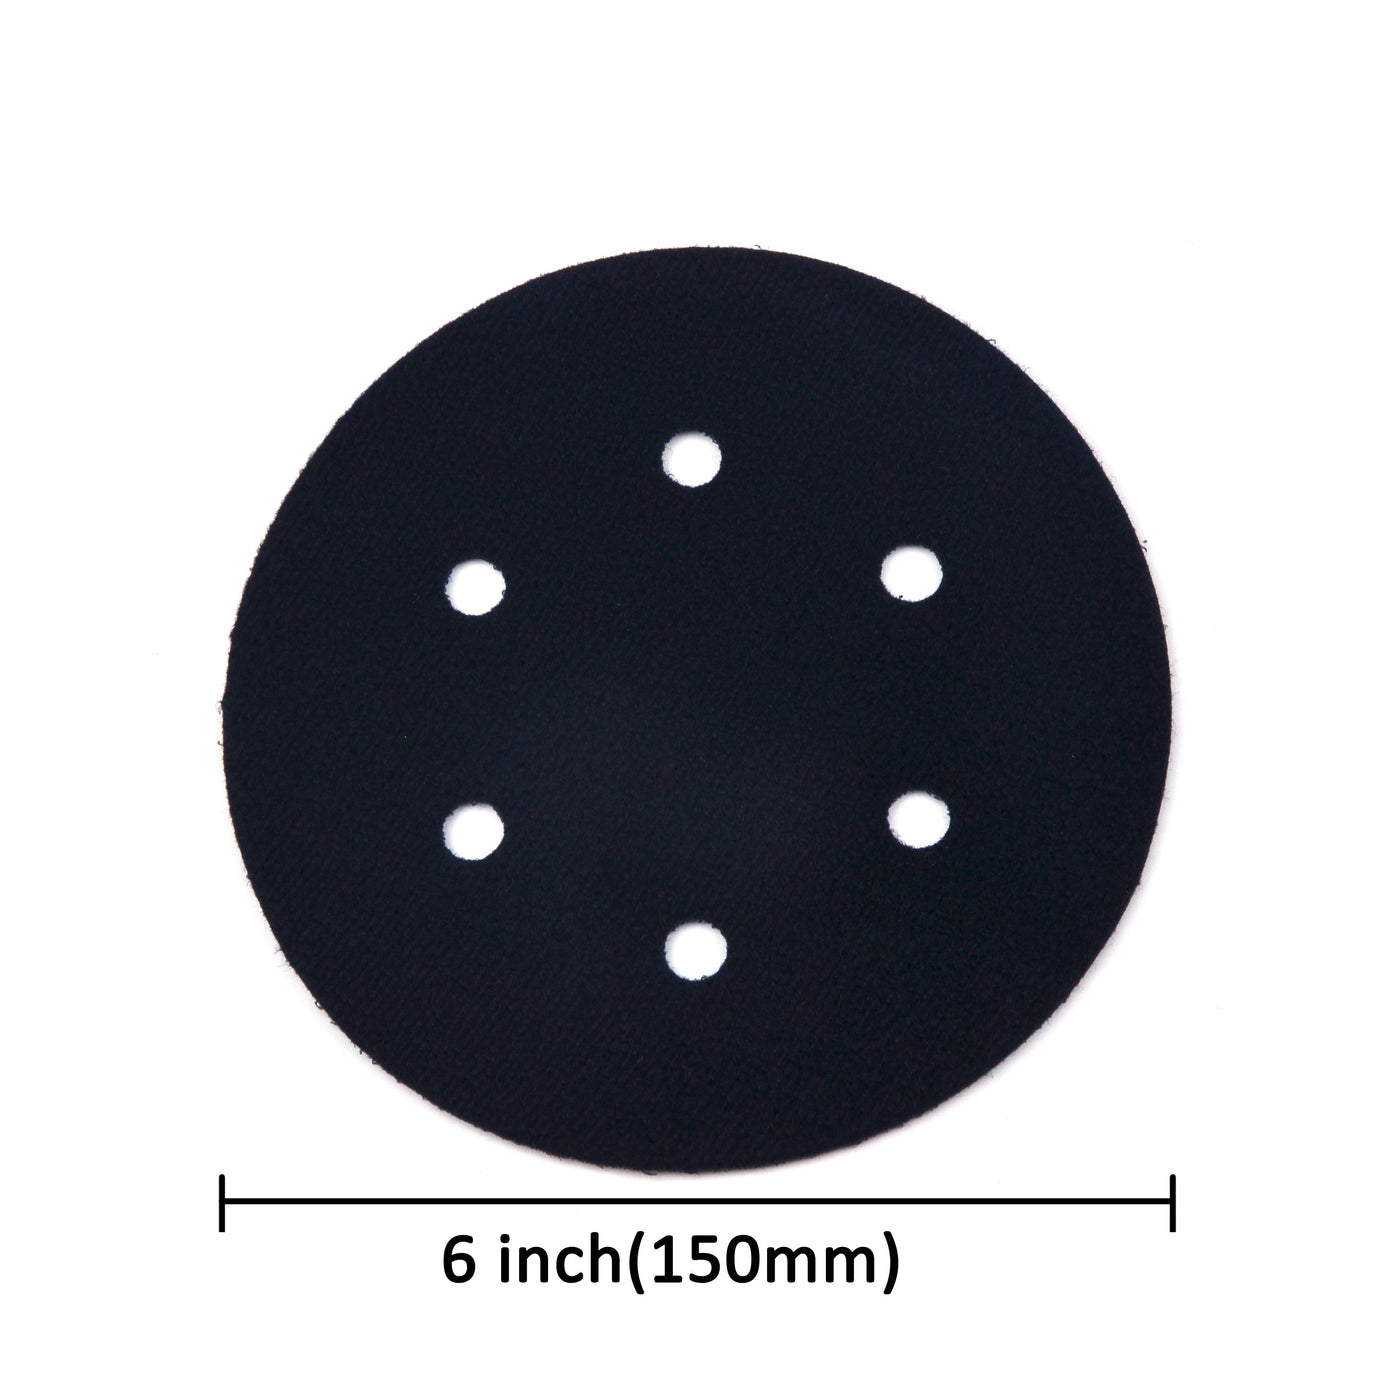 5 Inch 5 Holes Interface Pads